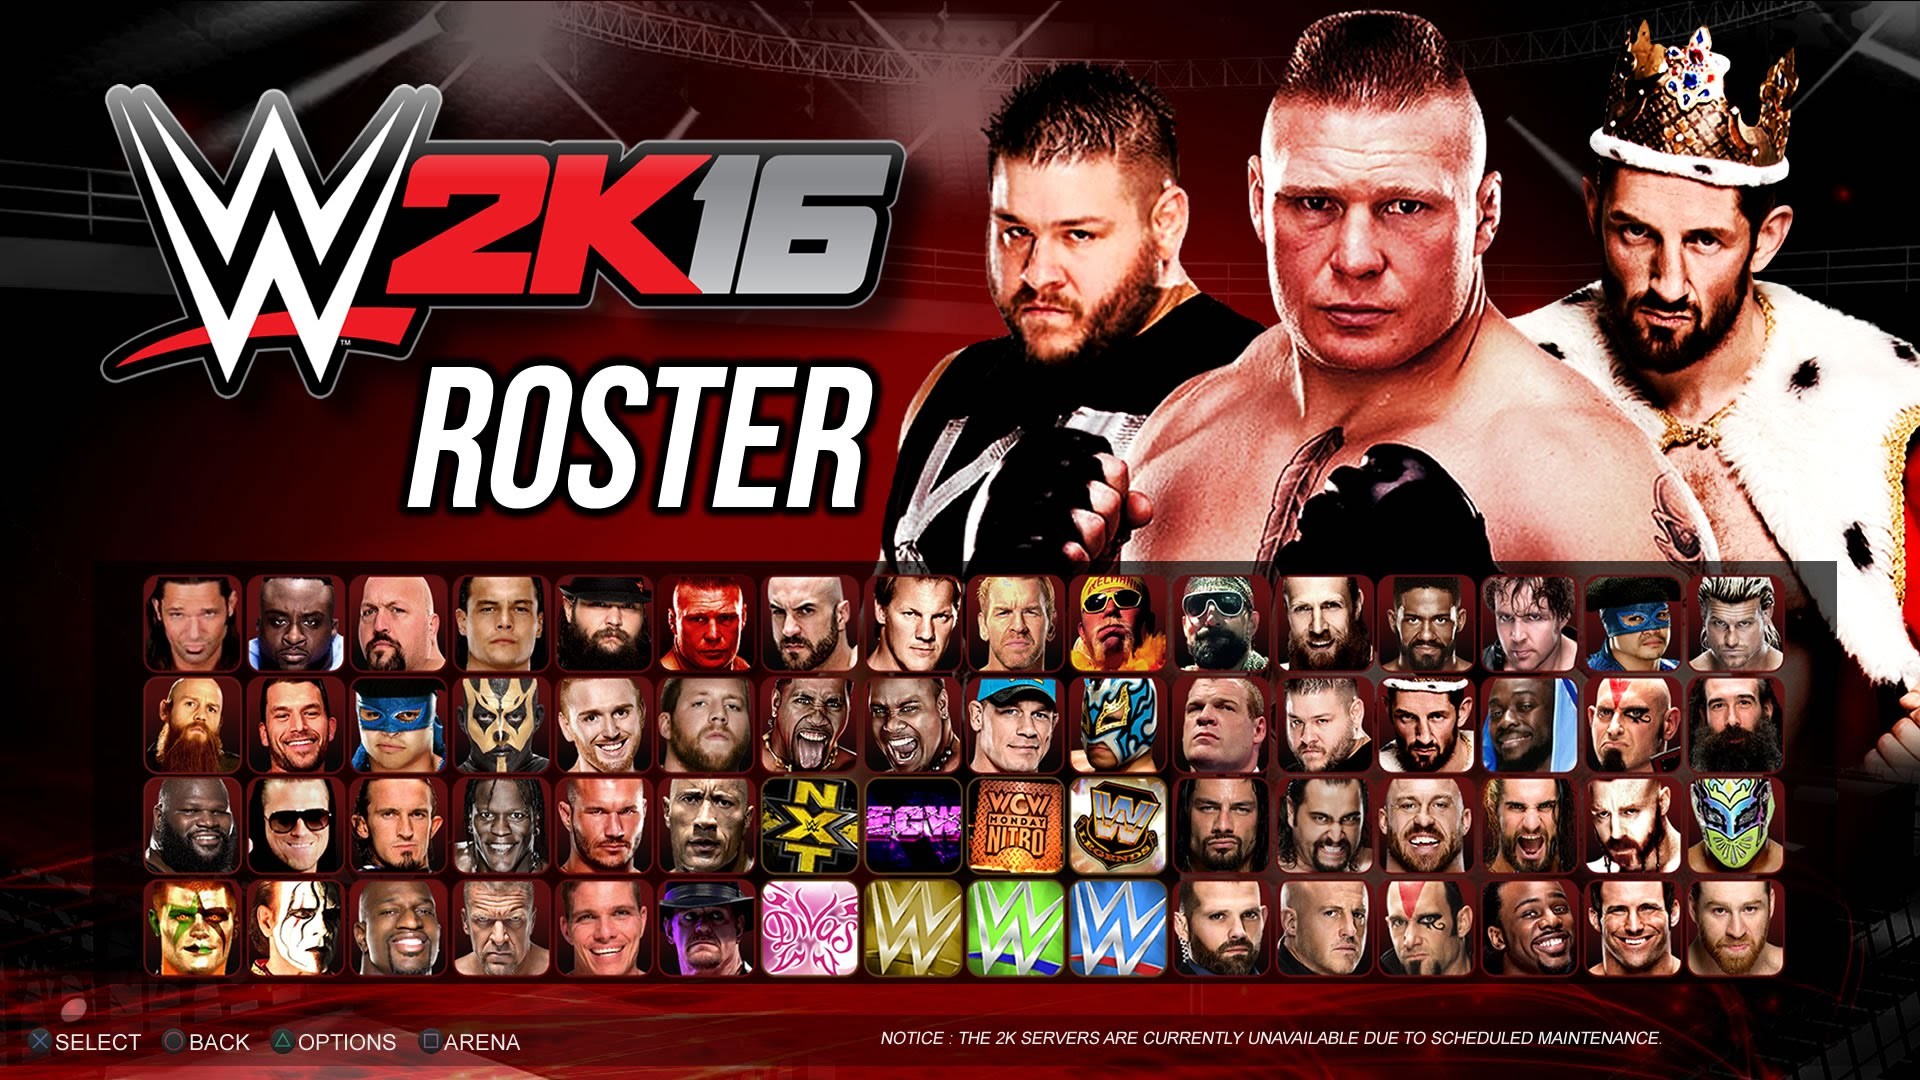 1920x1080 WWE 2K16 Roster - Biggest WWE Roster Ever! WCW, ECW, NXT, Divas